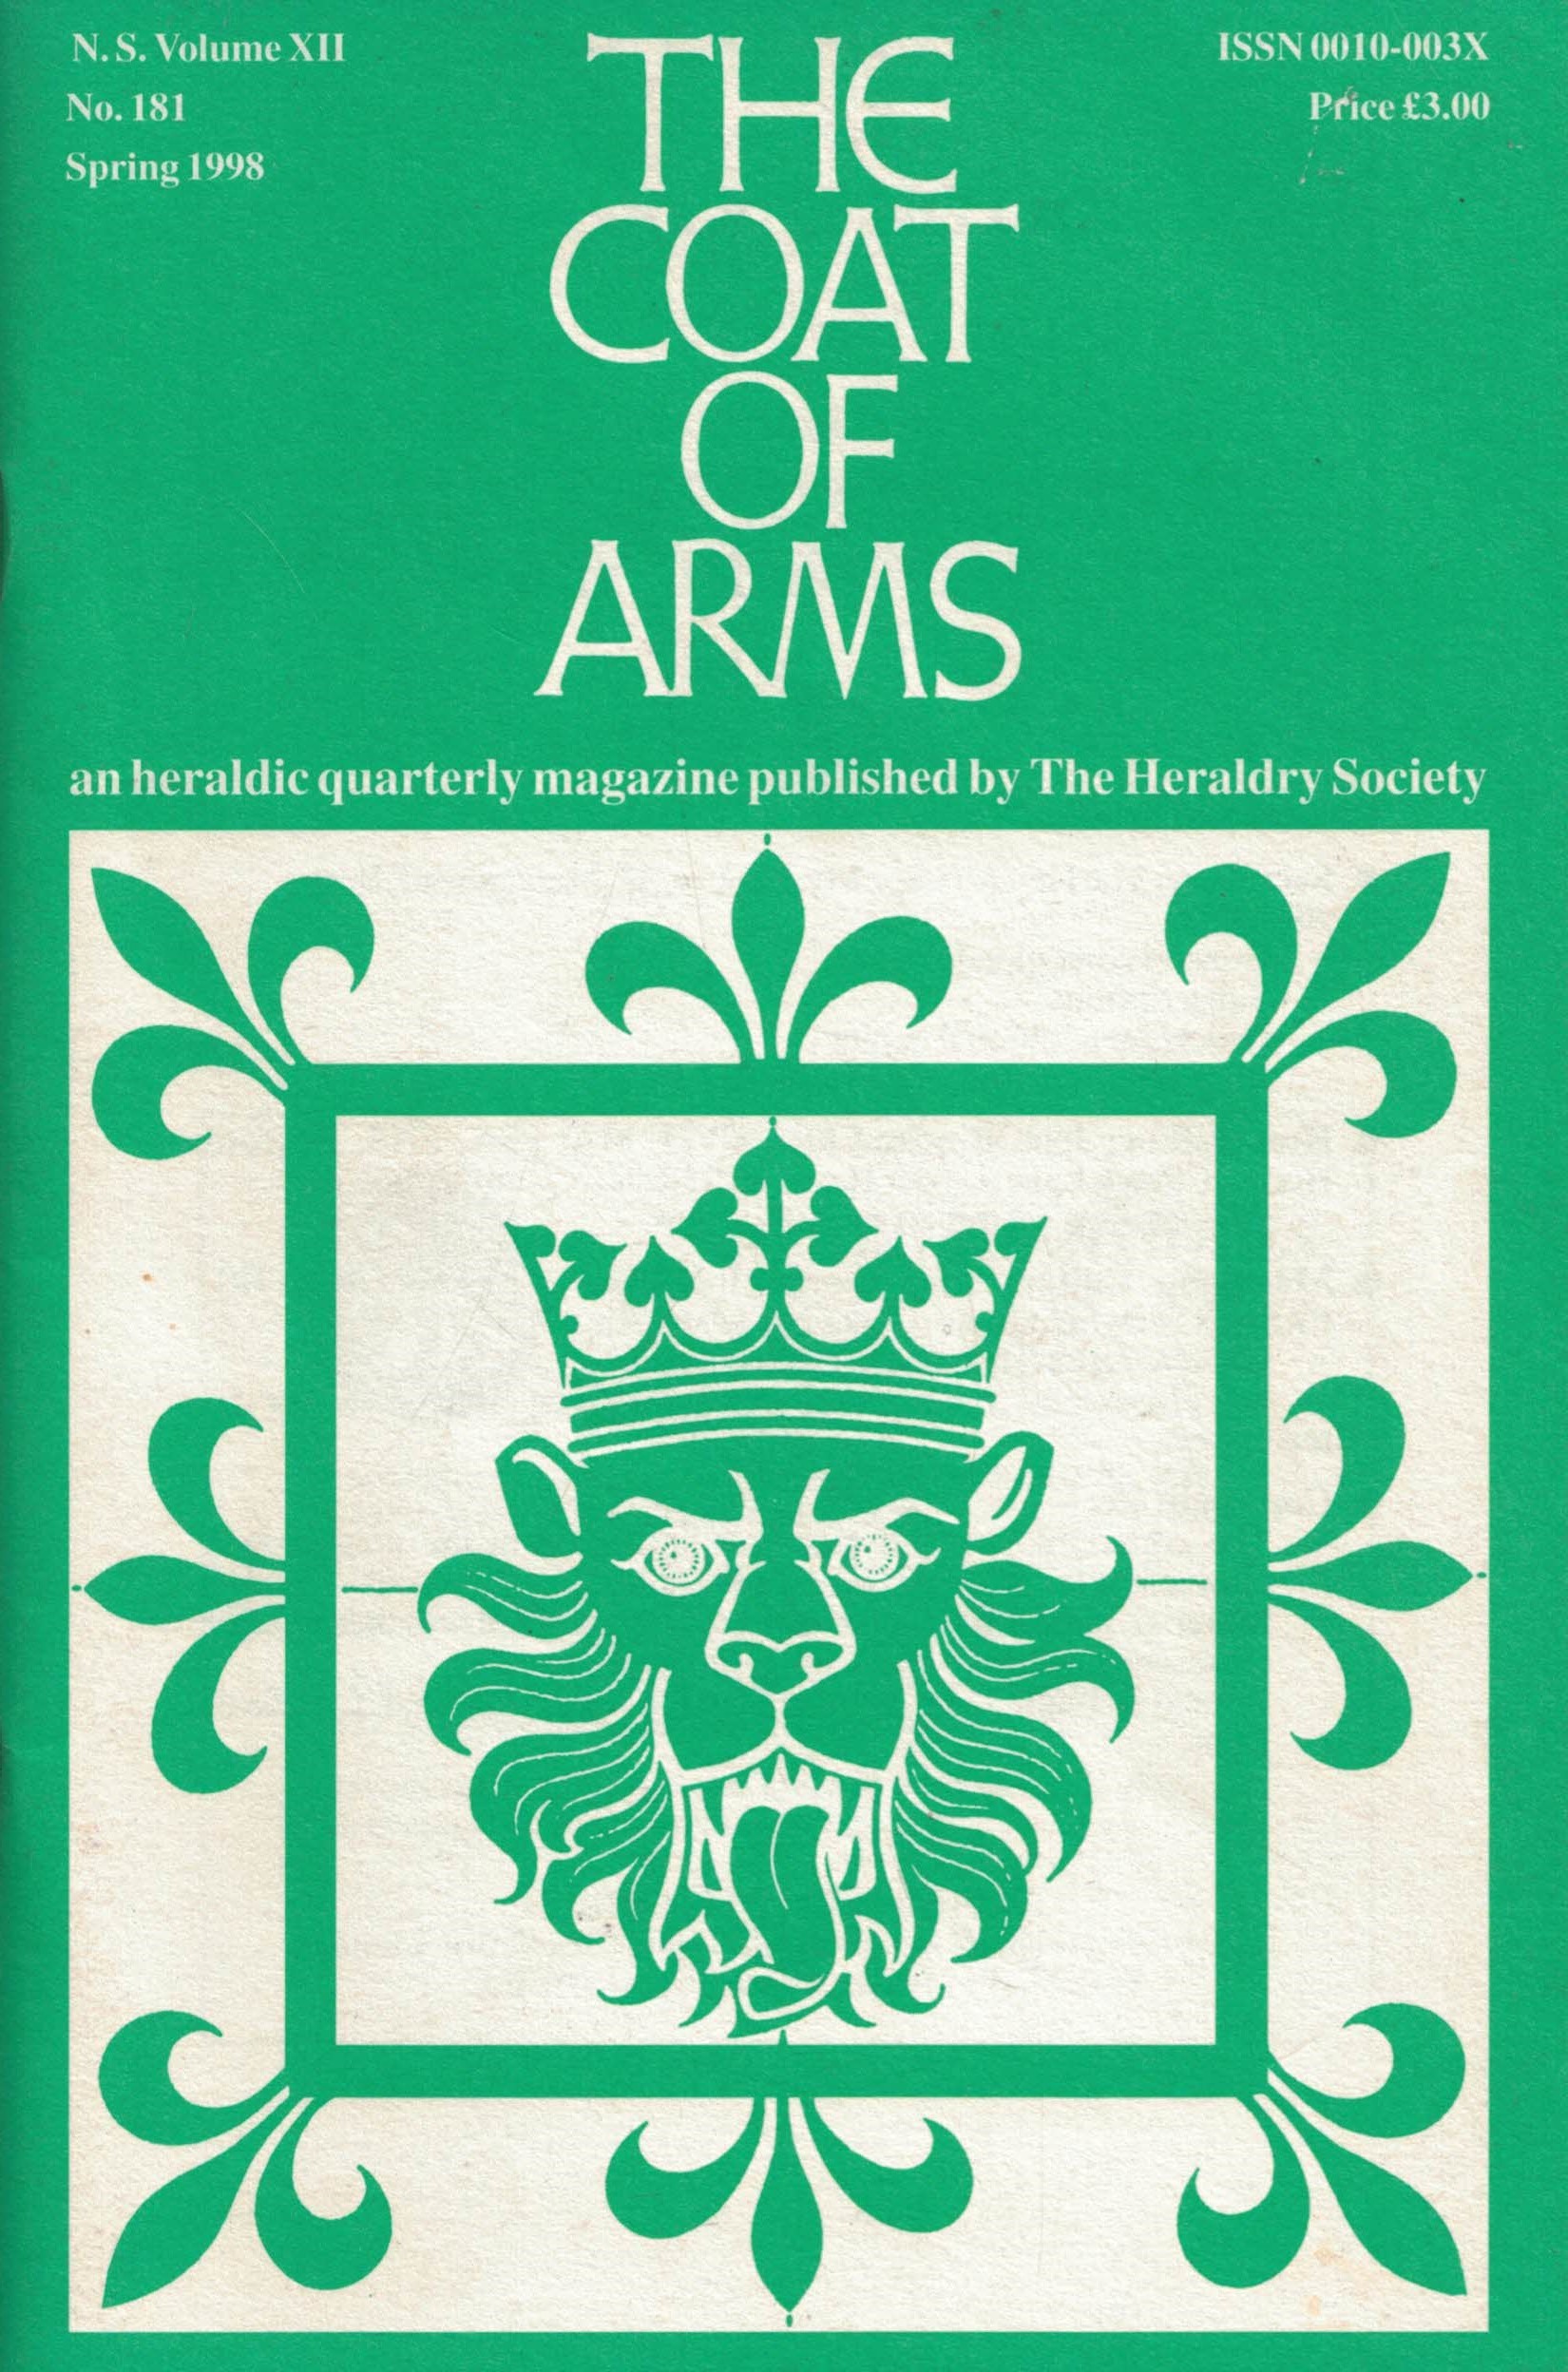 The Coat of Arms. NS Volume XII. No. 181. Spring 1998.